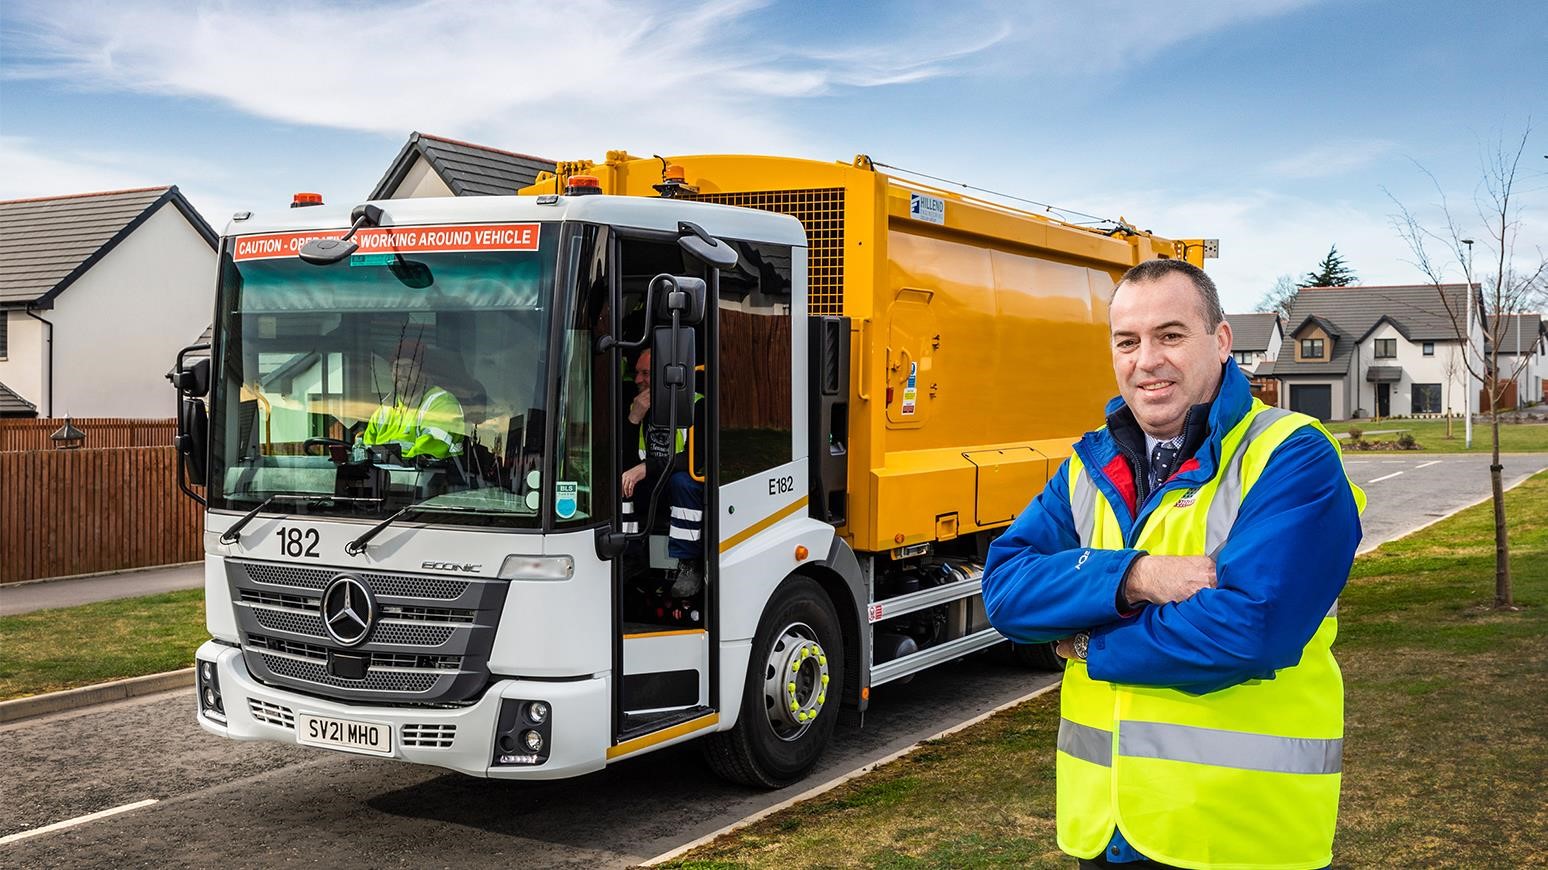 Scotland’s Moray Council Purchases Mercedes-Benz Econic Trucks With The Latest Active Safety Systems